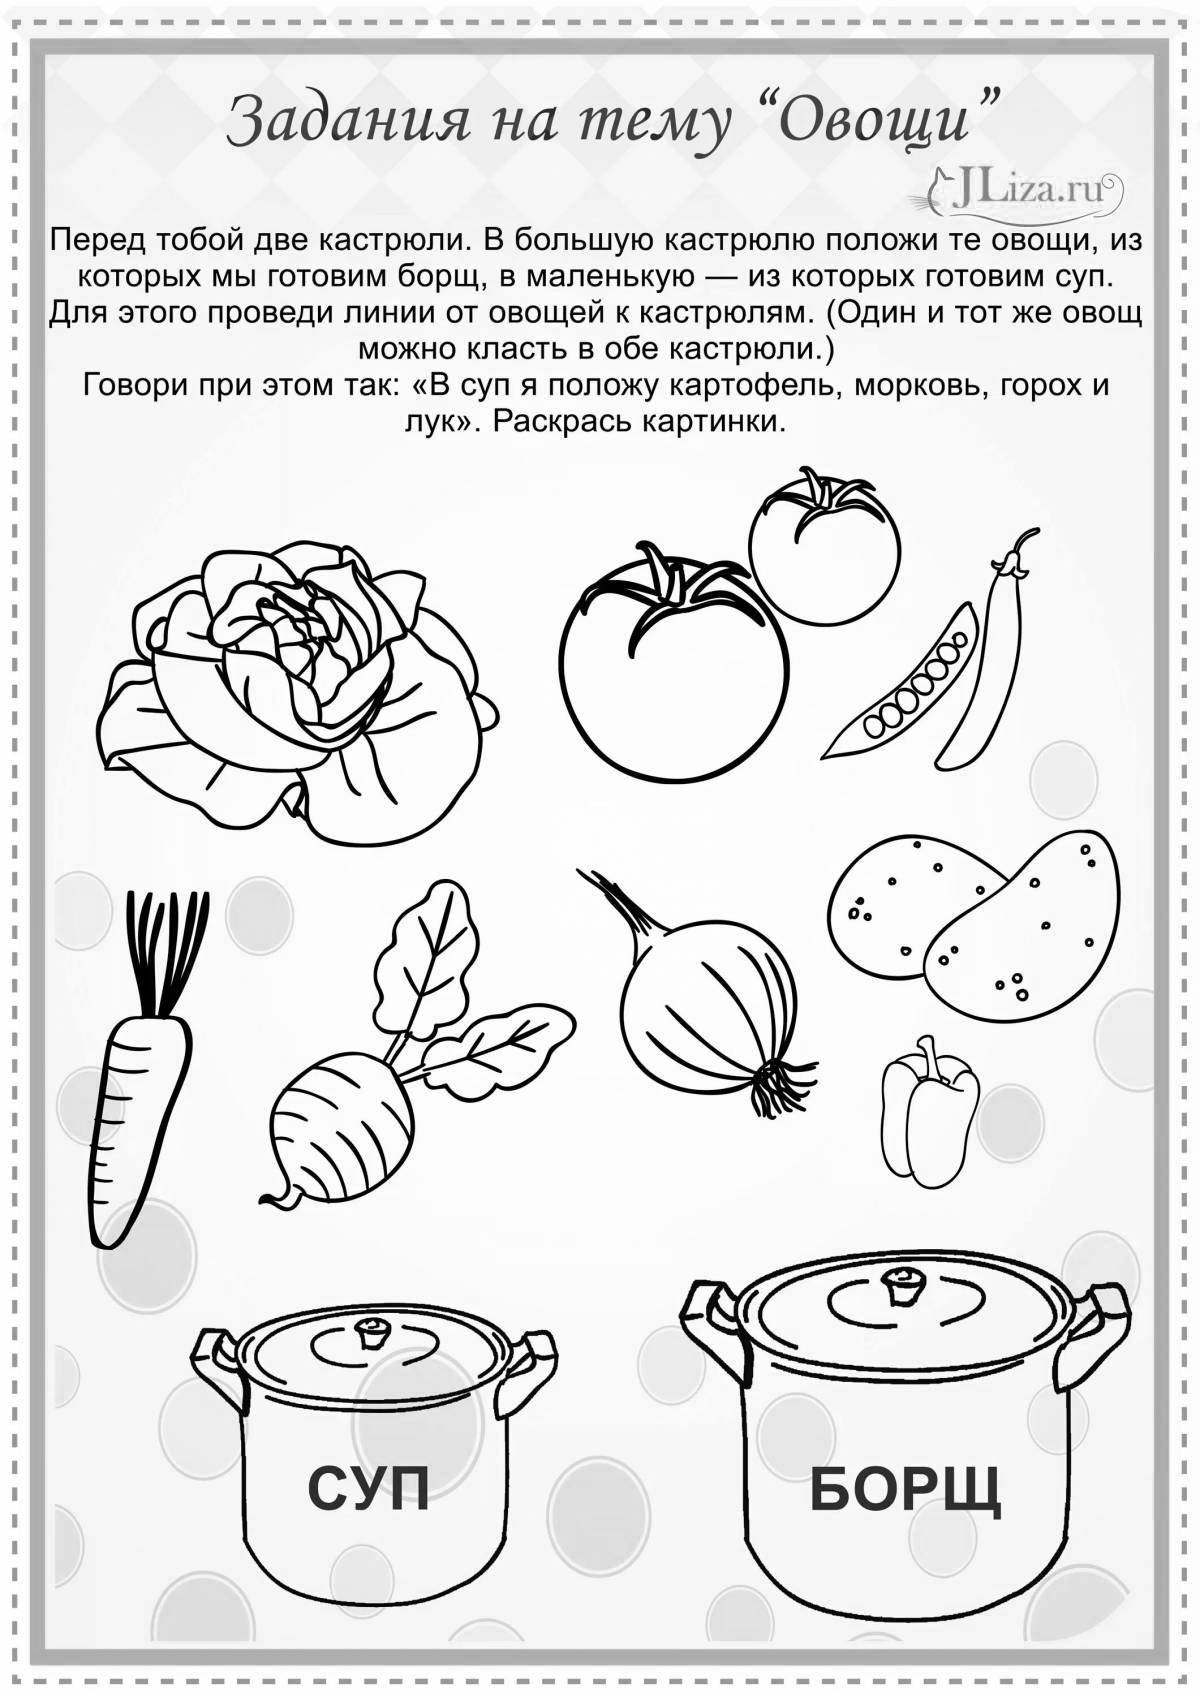 Coloring recipes colorful-delight